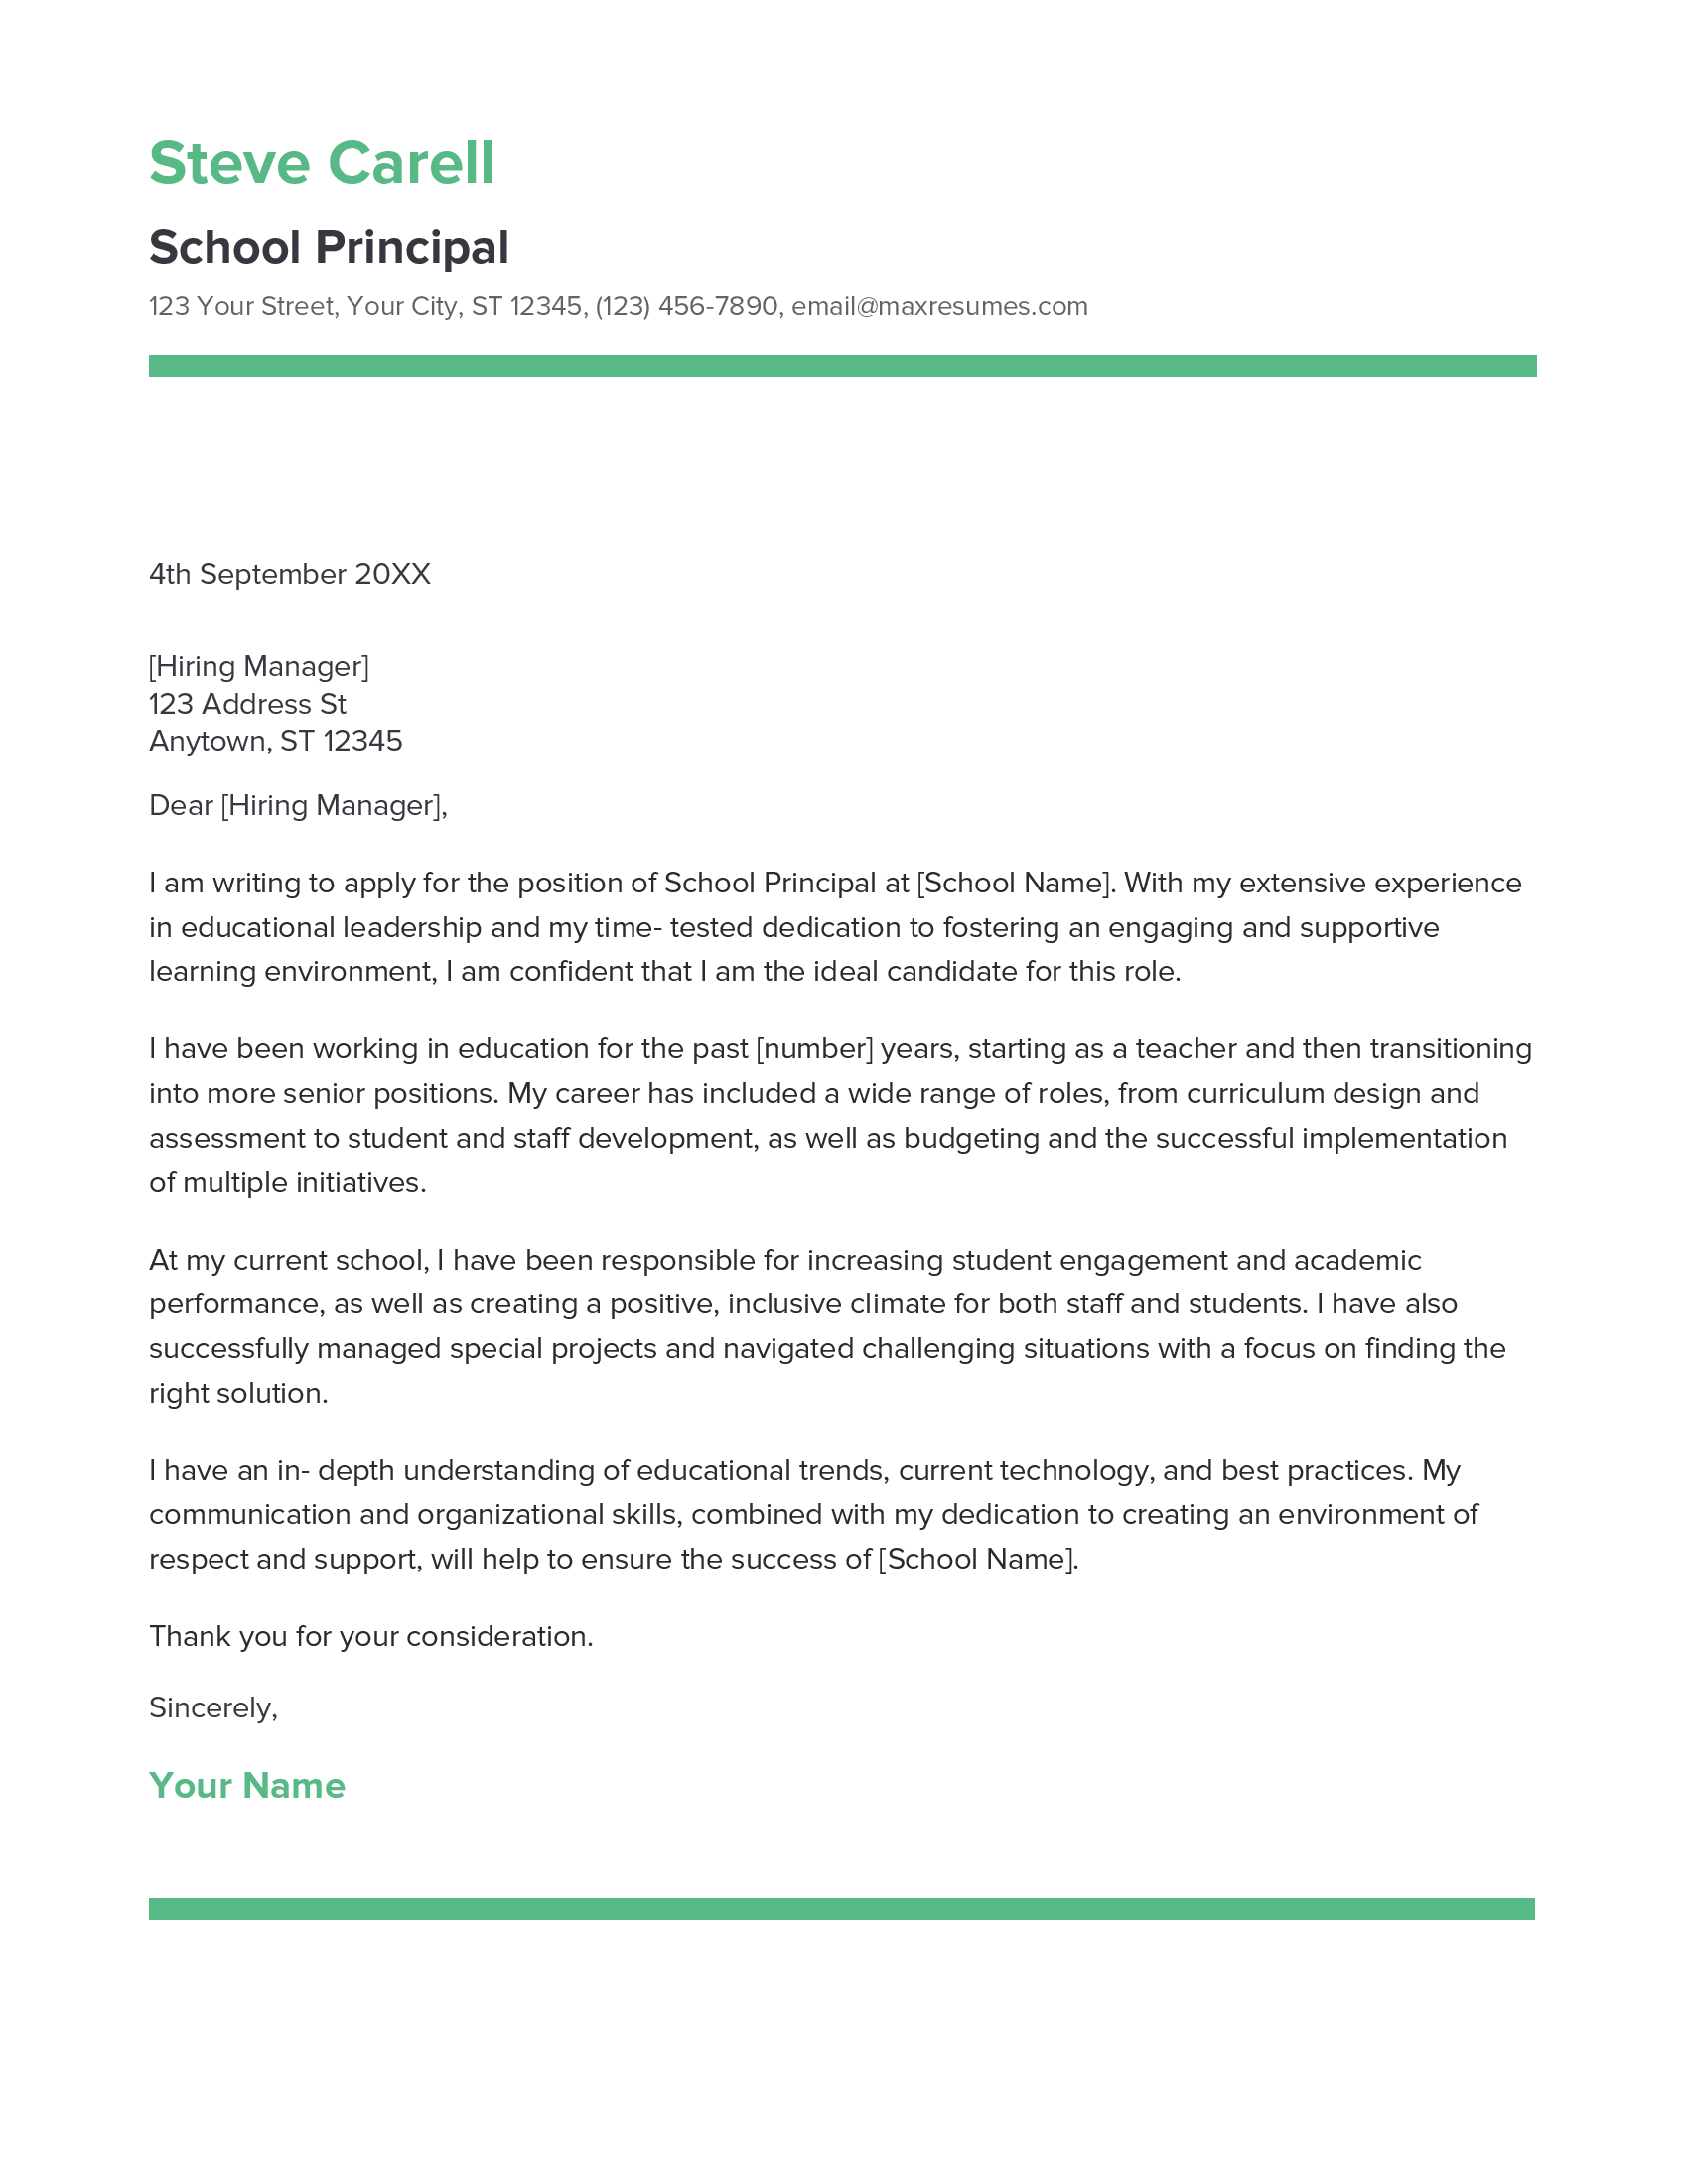 School Principal Cover Letter Example